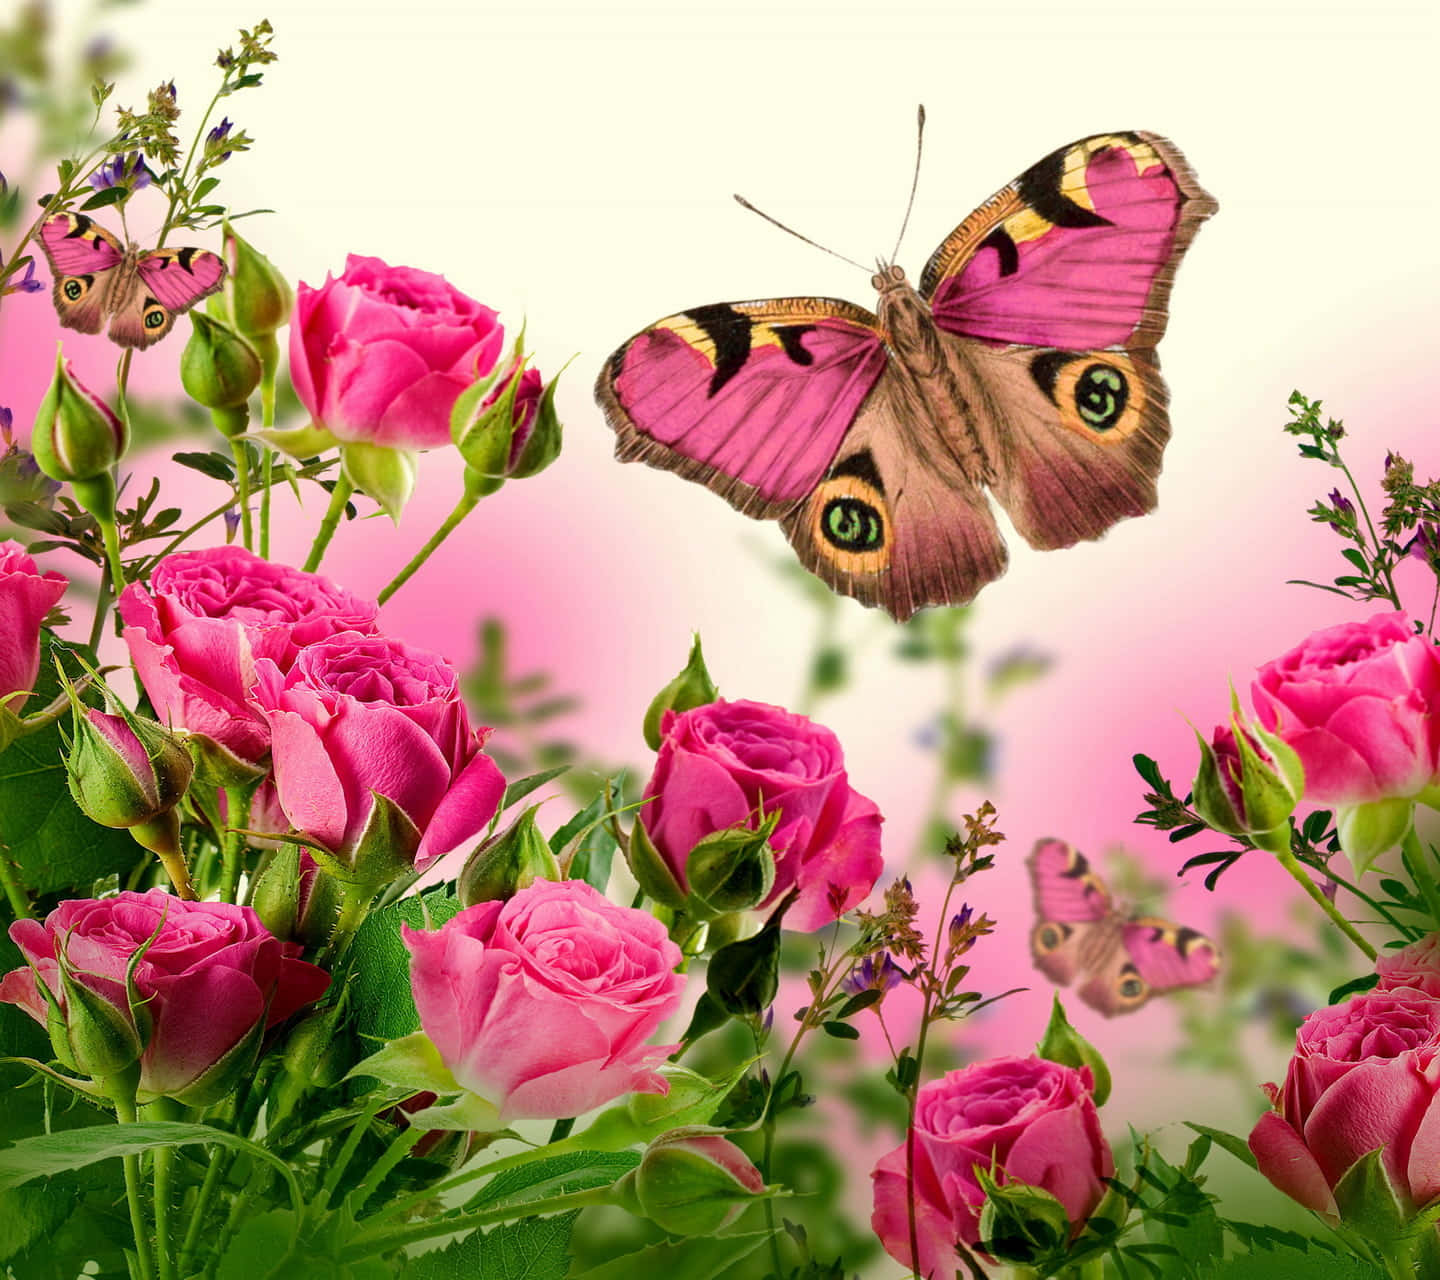 "Beautiful Wings of the Pink Butterfly"